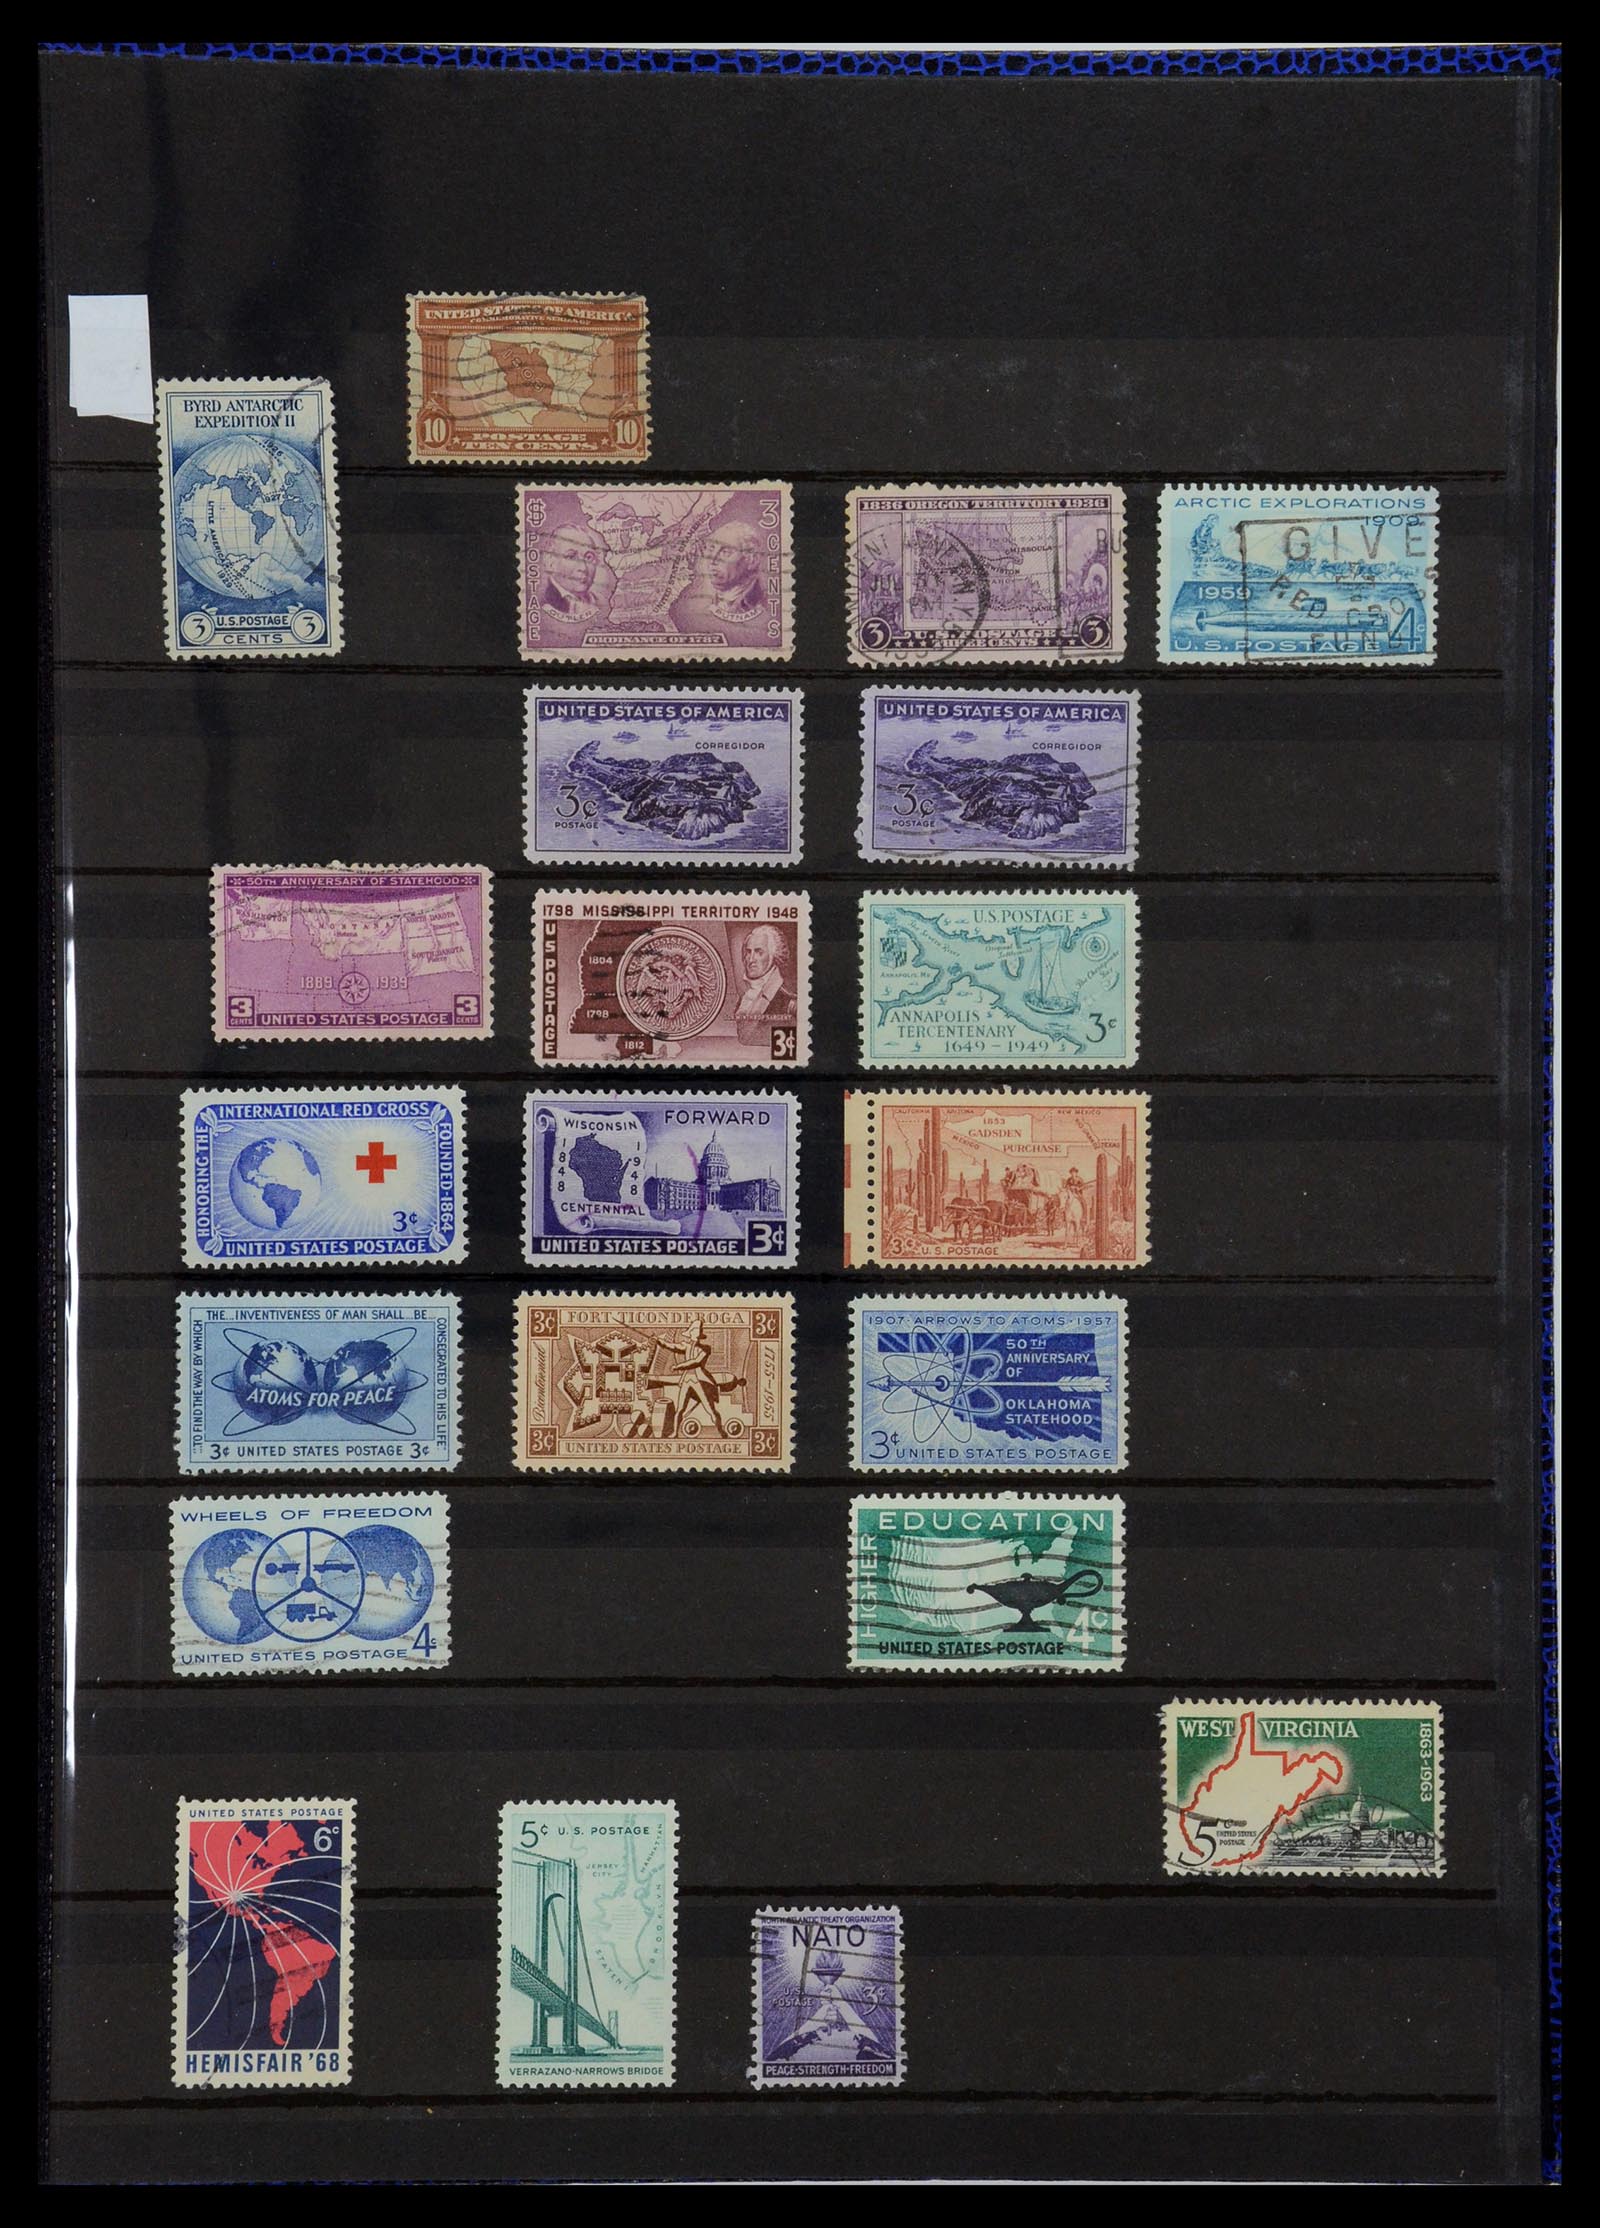 36238 319 - Stamp collection 36238 Motif maps 1900-2000.